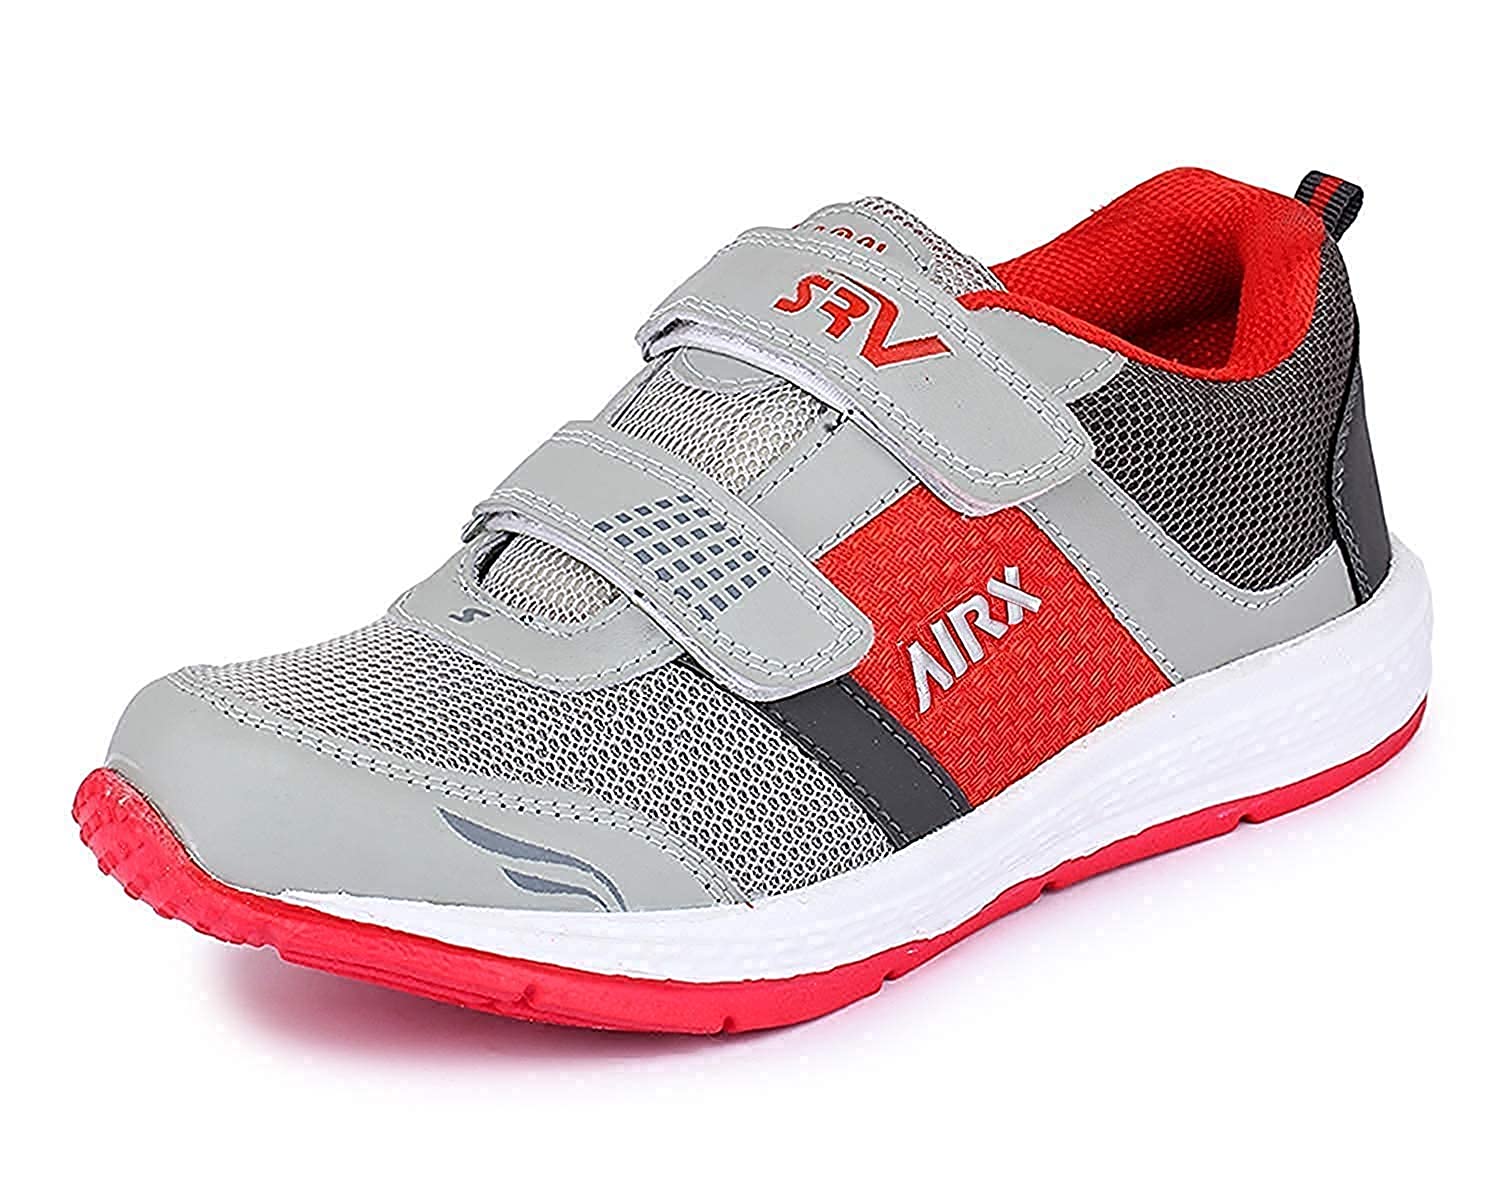 TRASE SR81-012 Grey Red Boys Sports Running Shoes - 4 UK